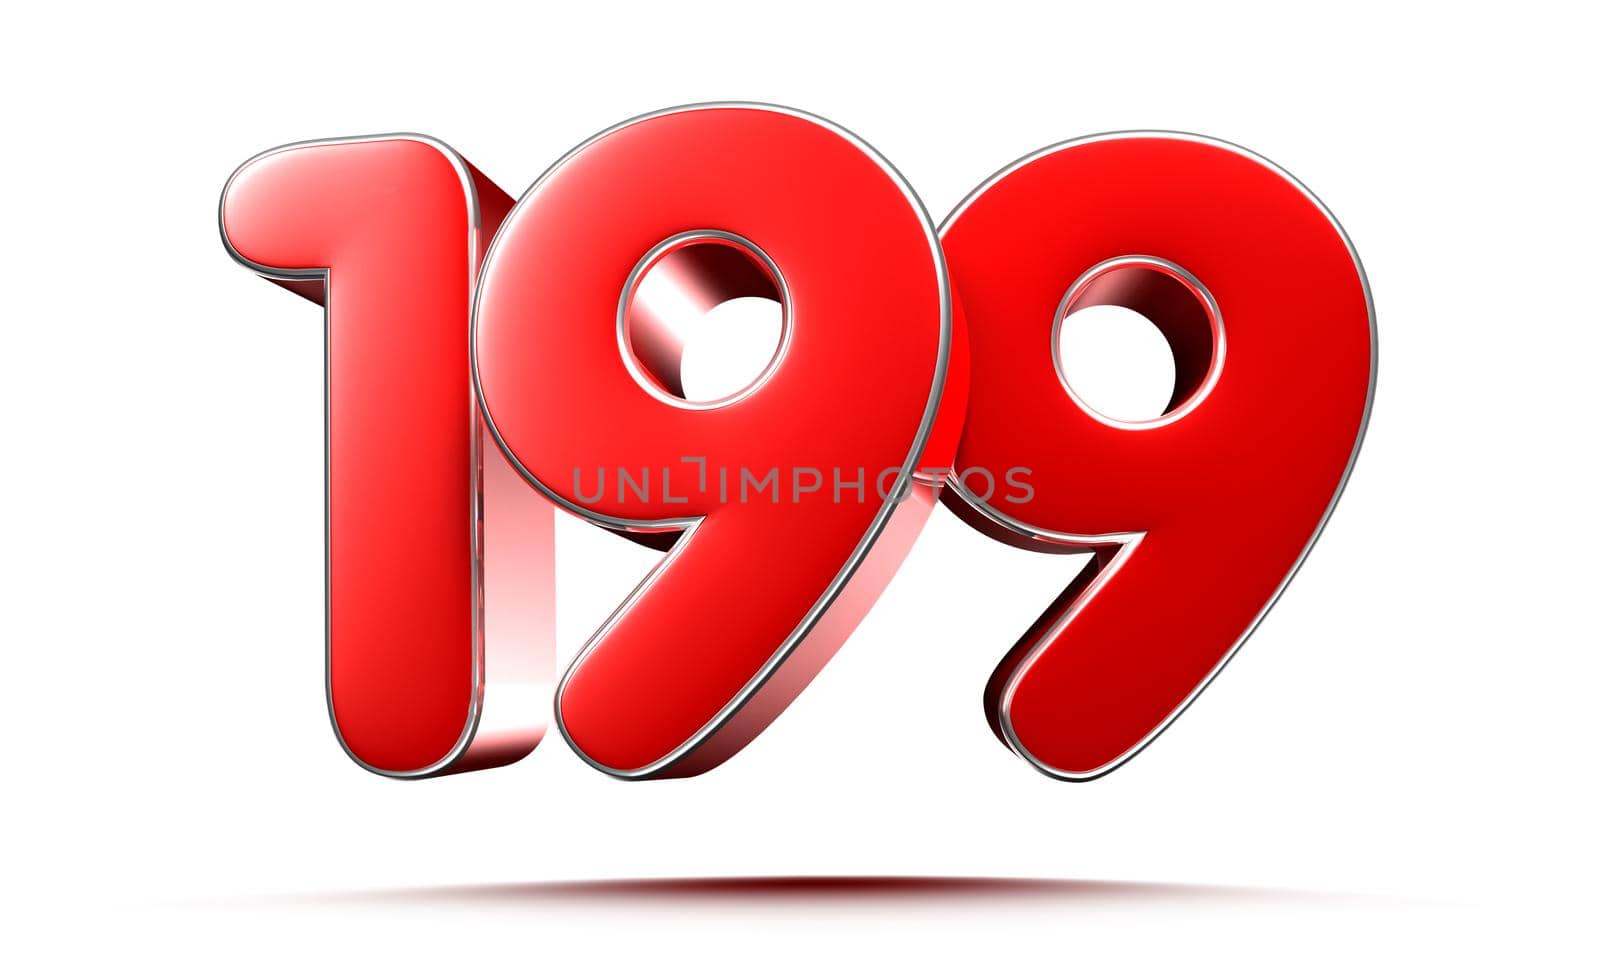 Rounded red numbers 199 on white background 3D illustration with clipping path by thitimontoyai